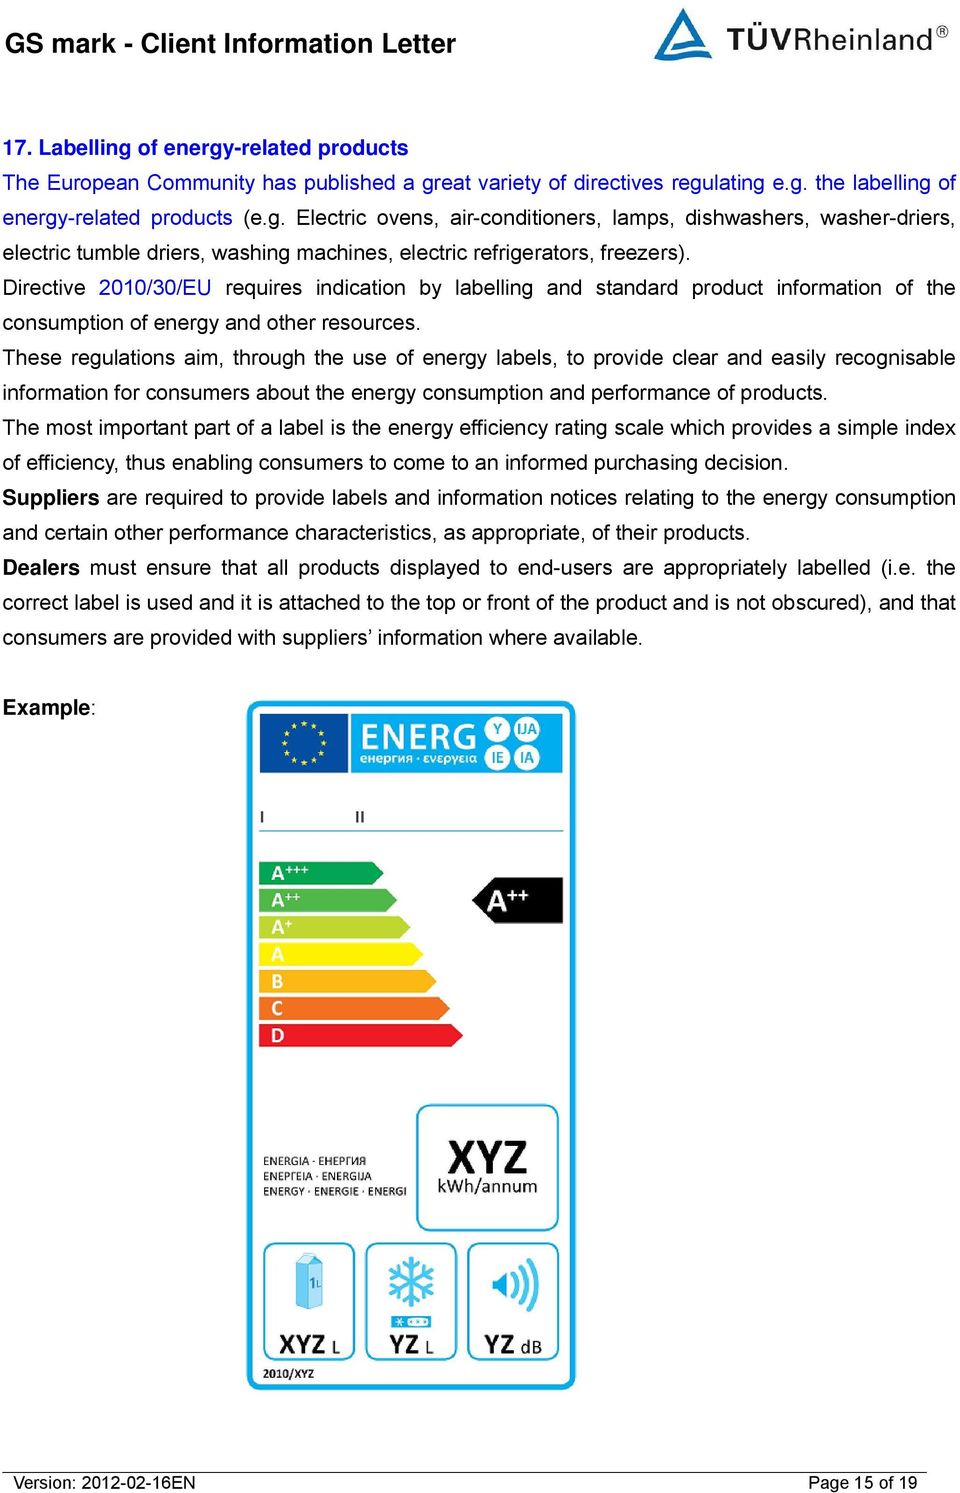 These regulations aim, through the use of energy labels, to provide clear and easily recognisable information for consumers about the energy consumption and performance of products.